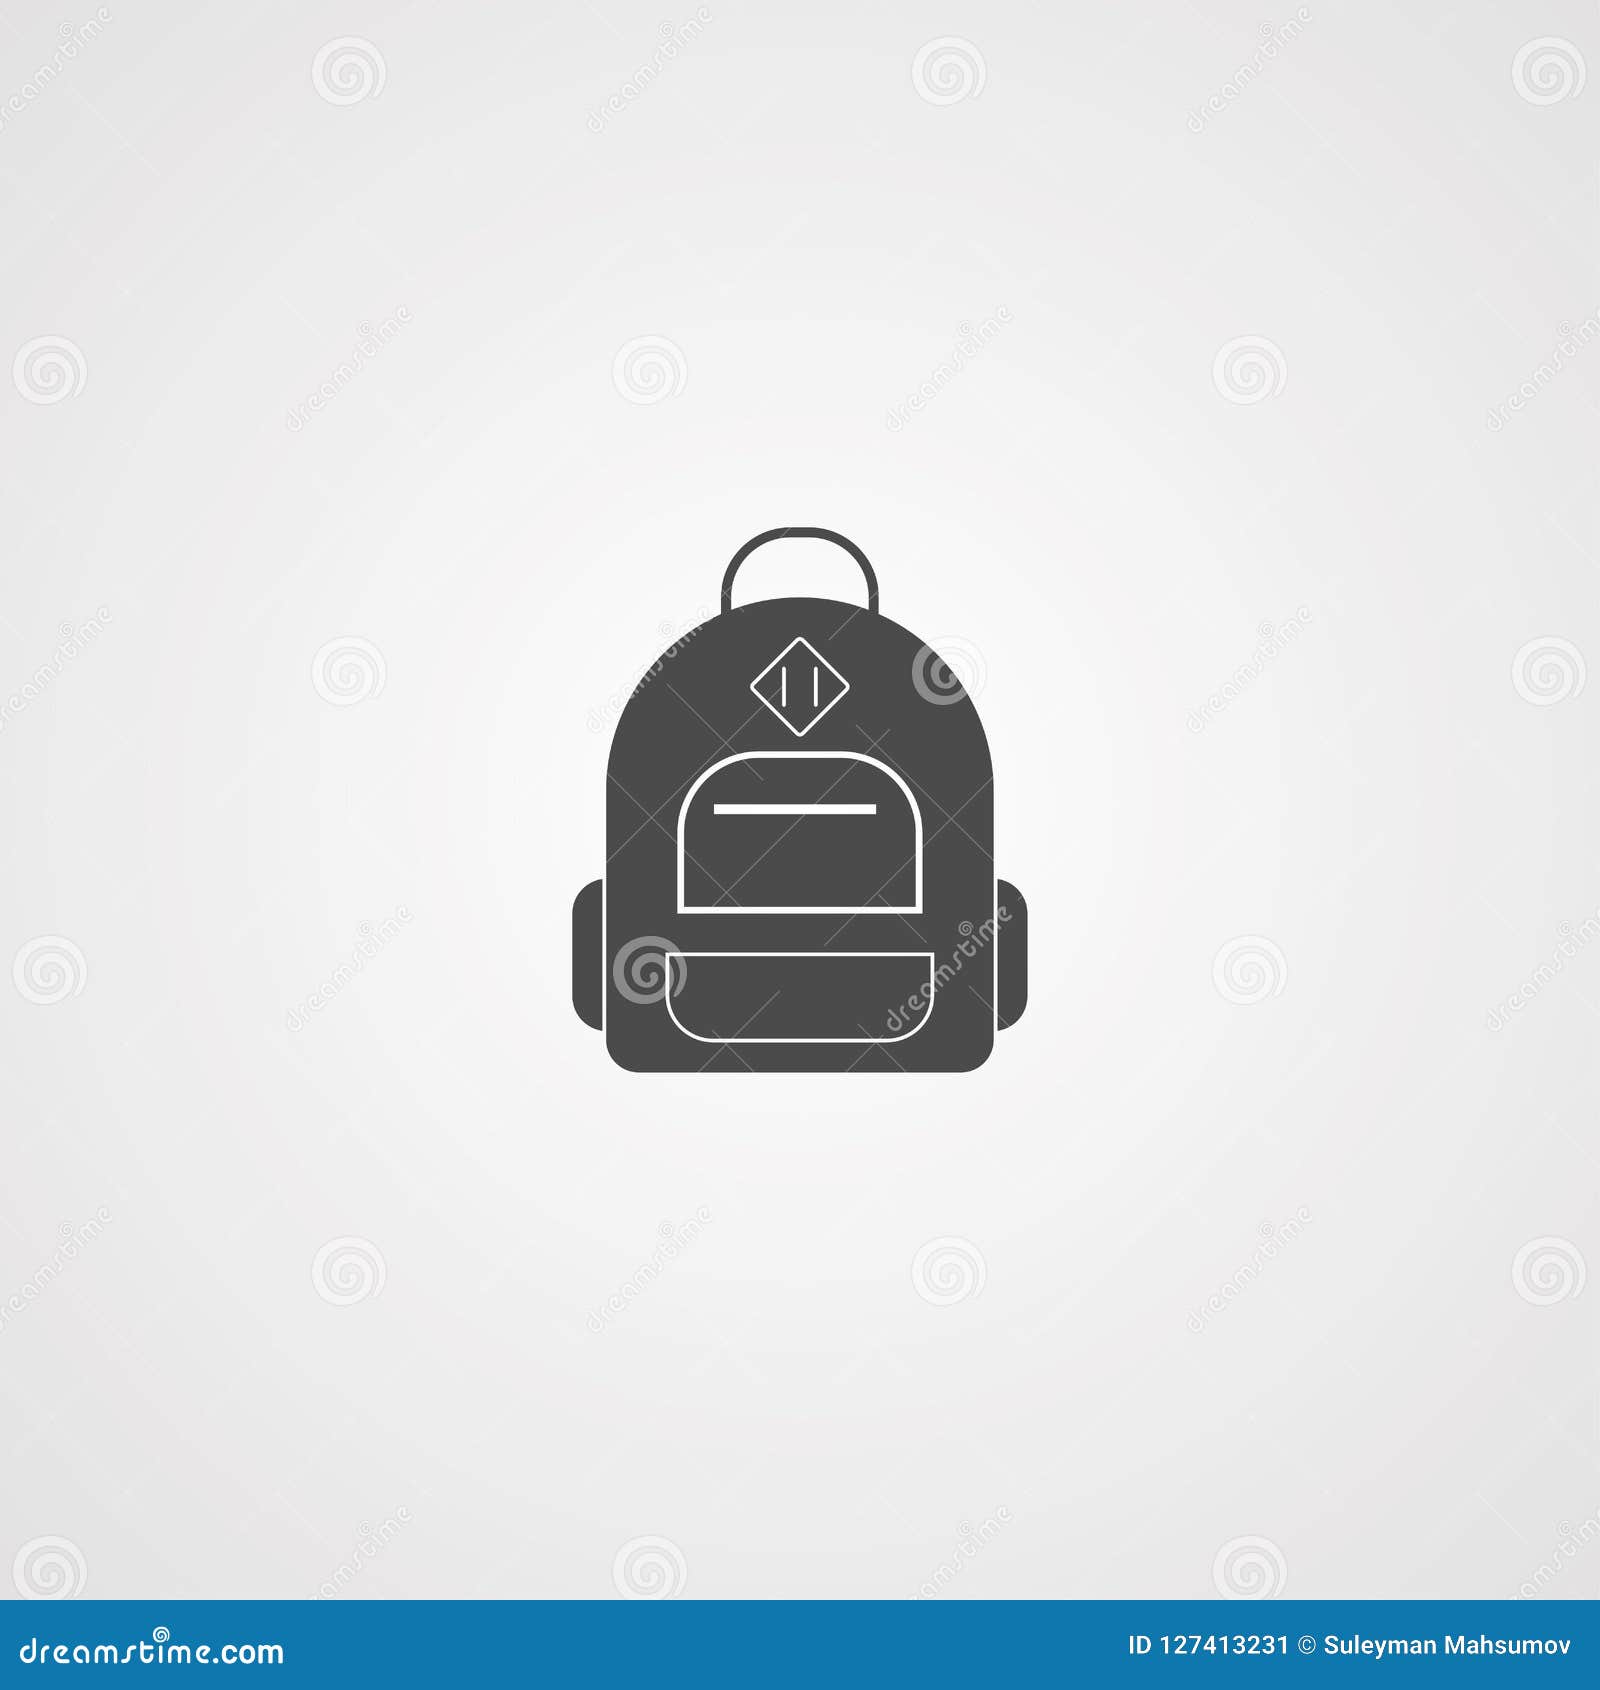 Backpack Vector Icon Sign Symbol Stock Vector - Illustration of element ...